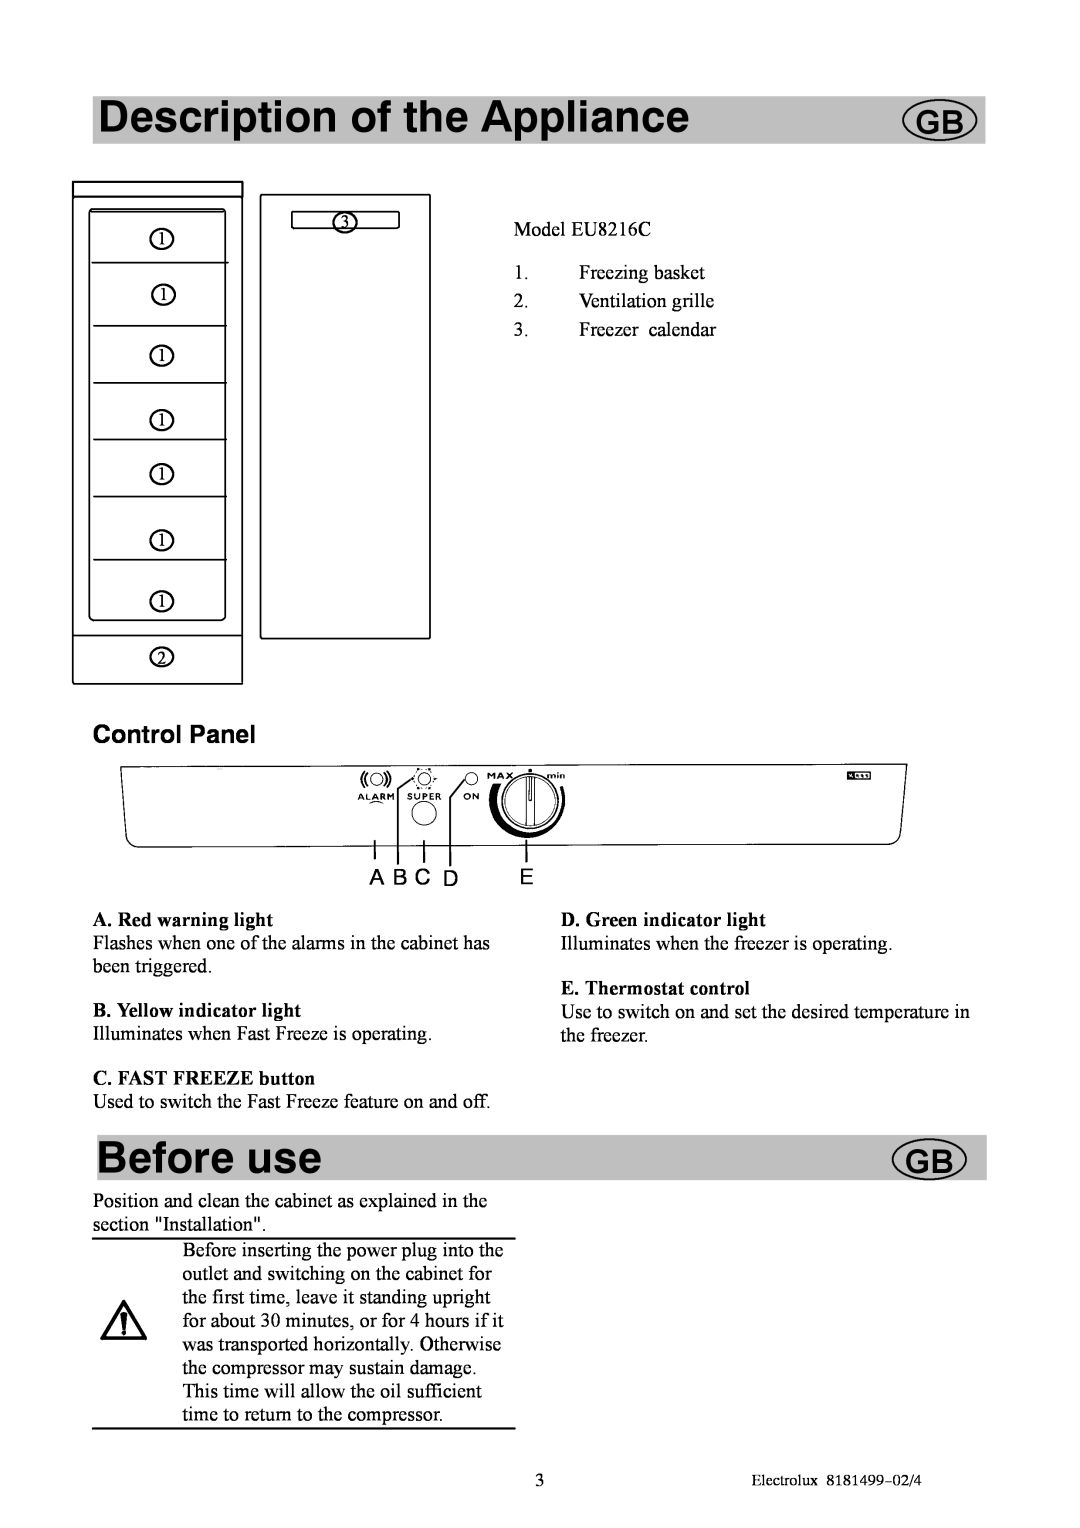 Electrolux EU8216C Description of the Appliance, Before use, Control Panel, A. Red warning light, C. FAST FREEZE button 